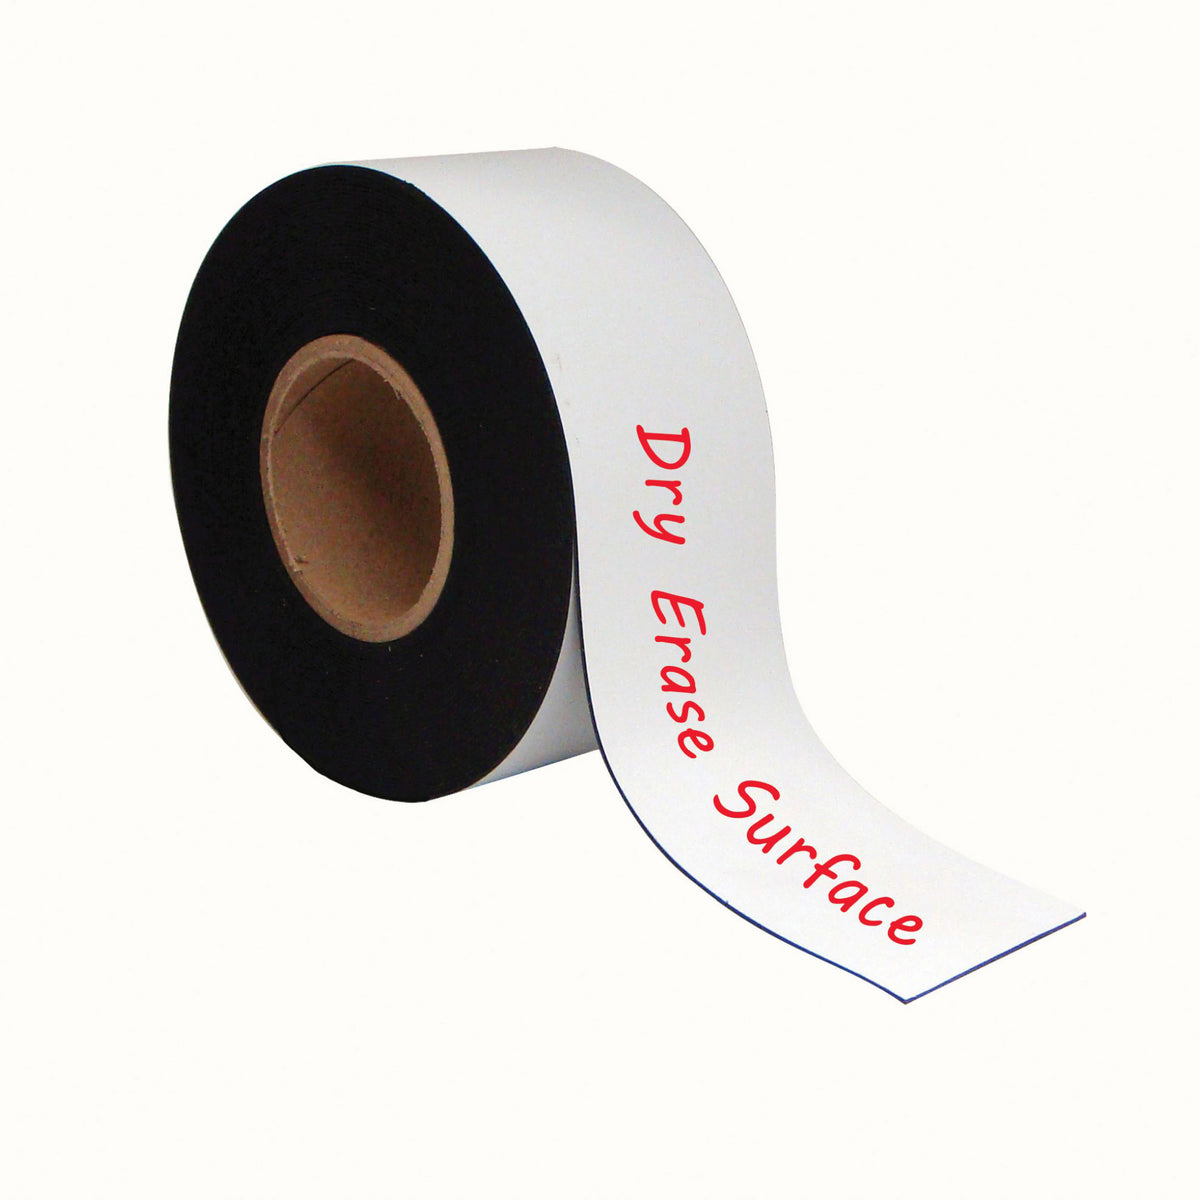 FM2218 Flexible Dry Erase Magnetic Strip Tape Roll, Write On, Wipe Off, 3" x 50' by MasterVision